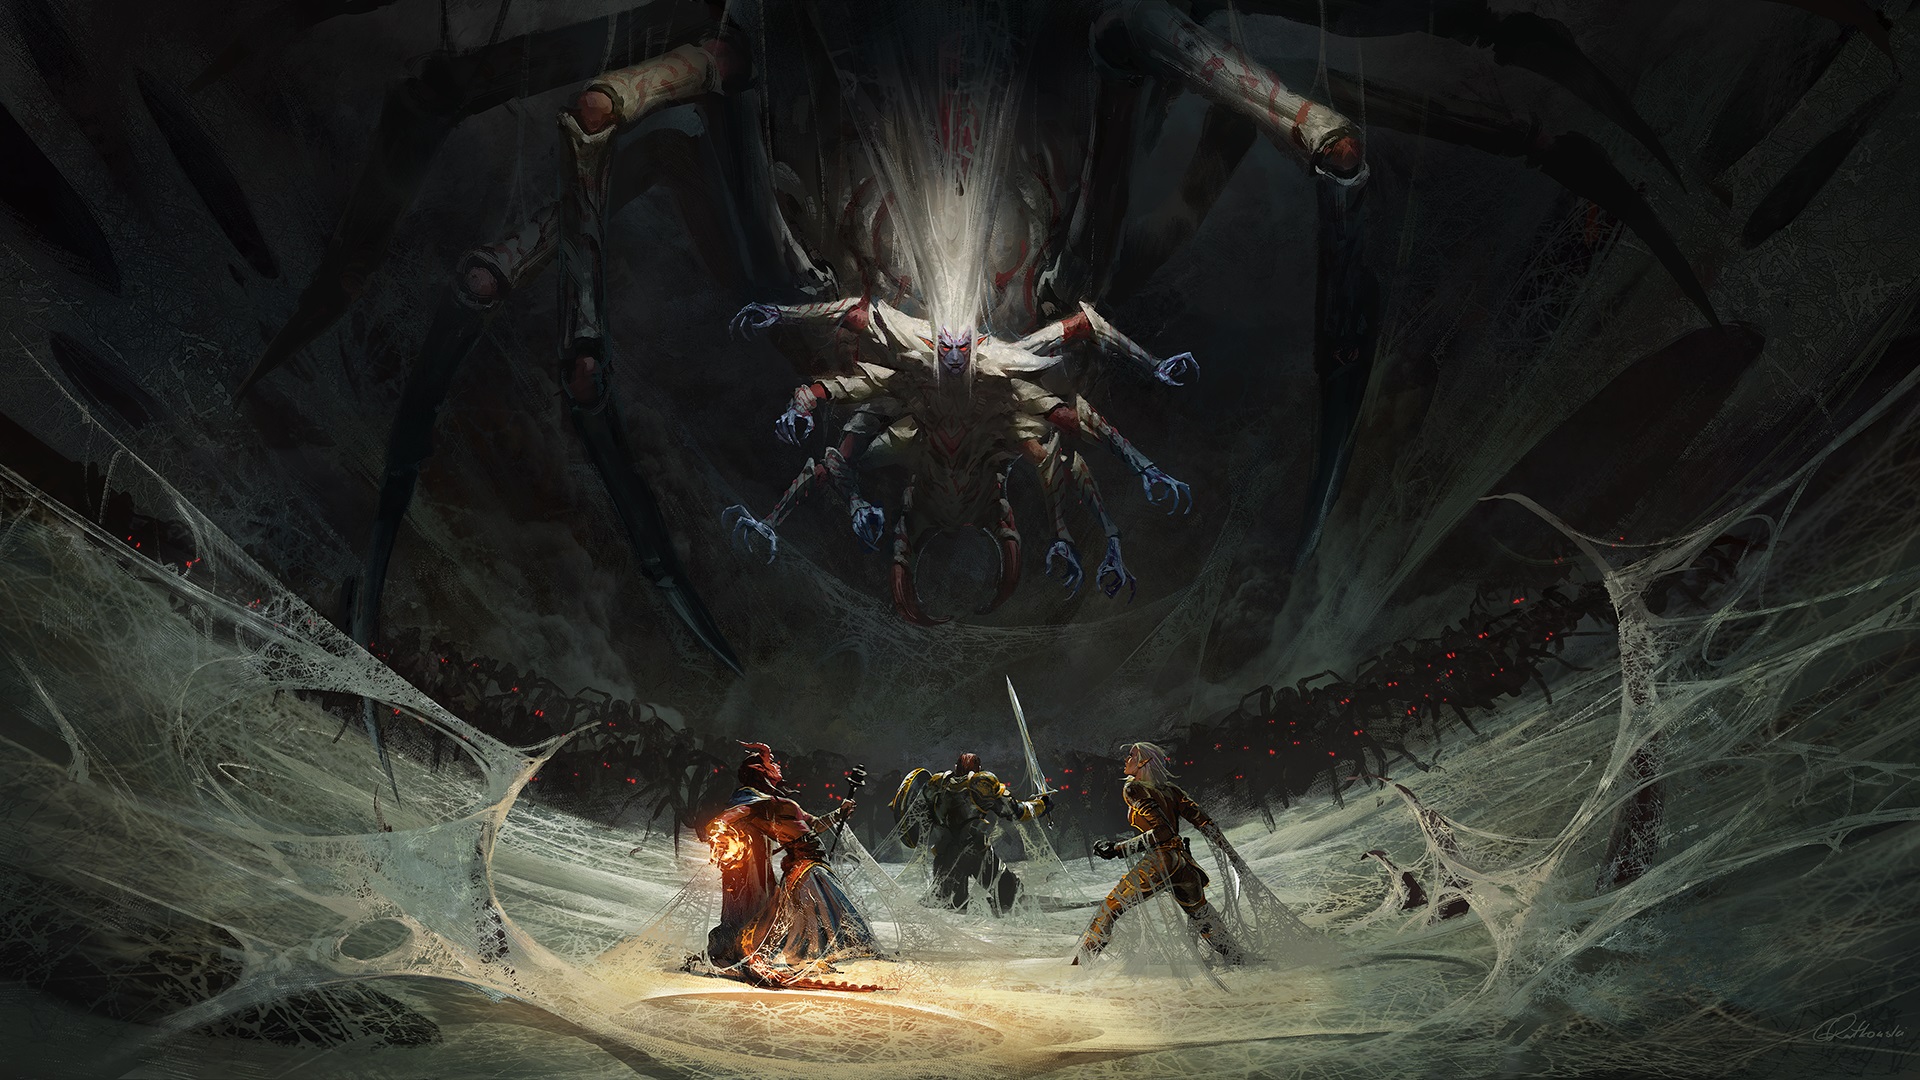 How Neverwinter Brings Traditional Dungeons & Dragons Heroes And Villains To Life